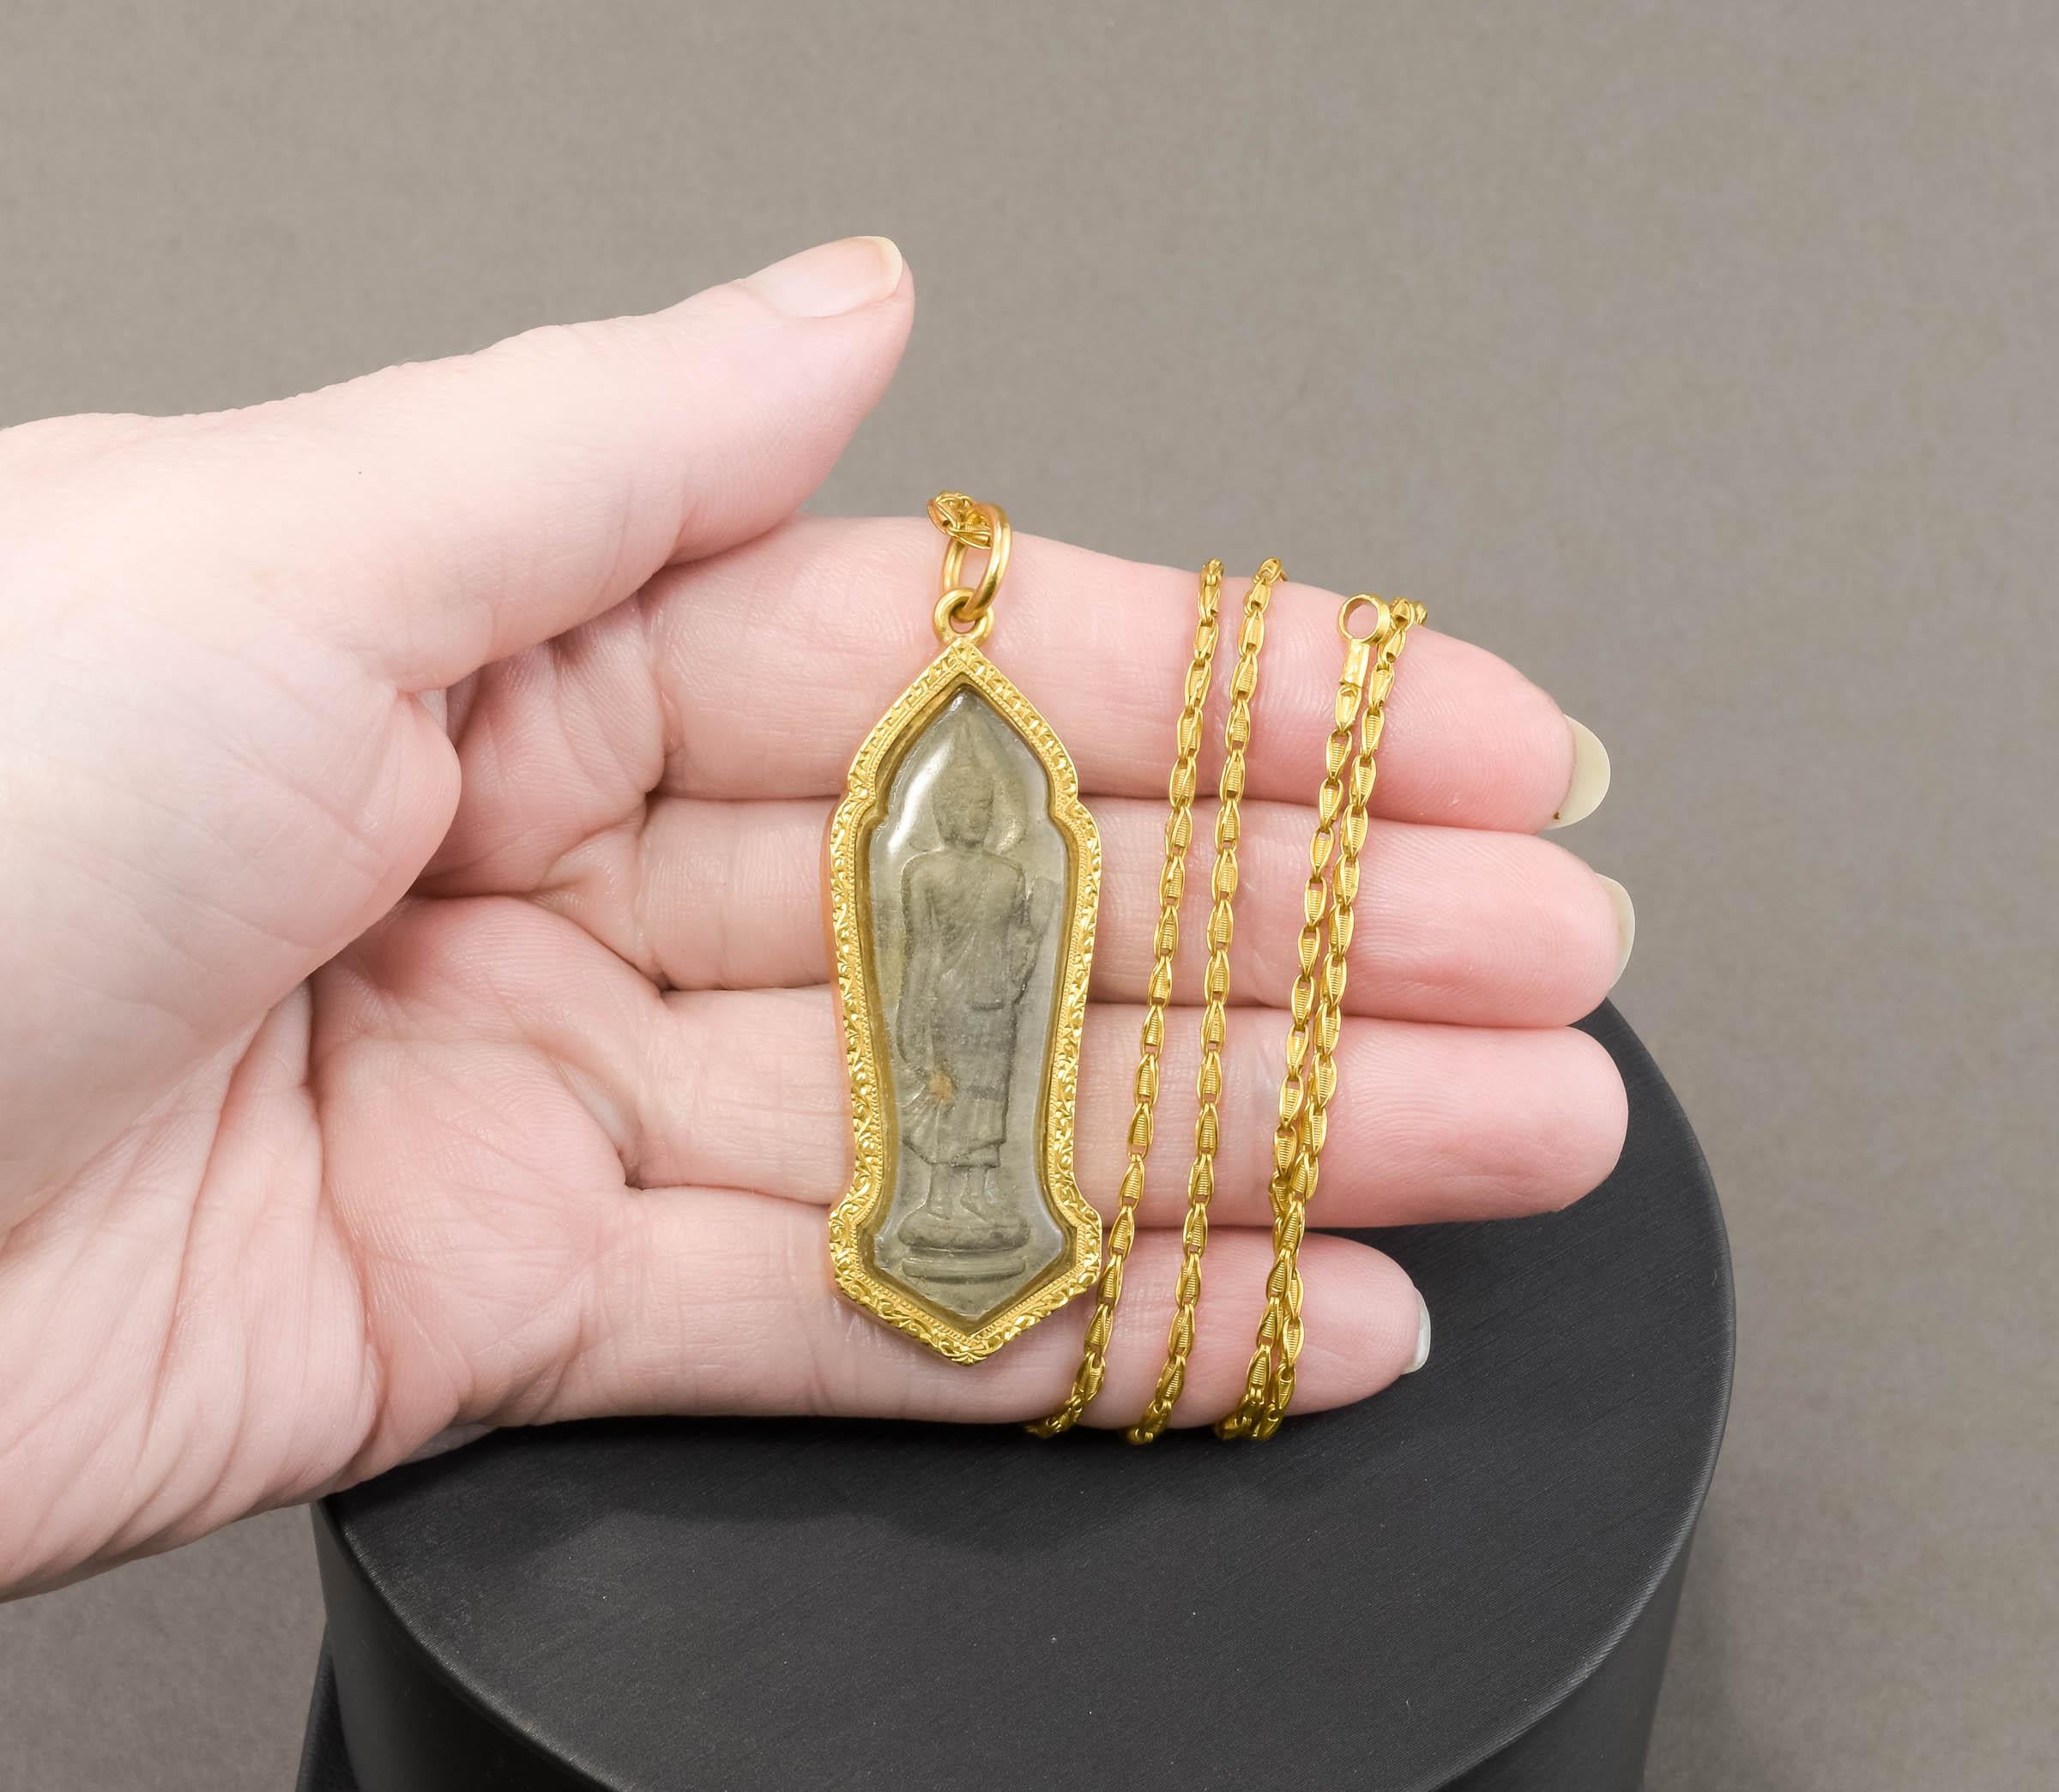 Offered is a particularly beautiful carved stone Buddha under glass, within a decorative high karat gold frame - suspended from a fancy link high karat gold chain.  The research I have done tells me that this amulet or reliquary is based on a